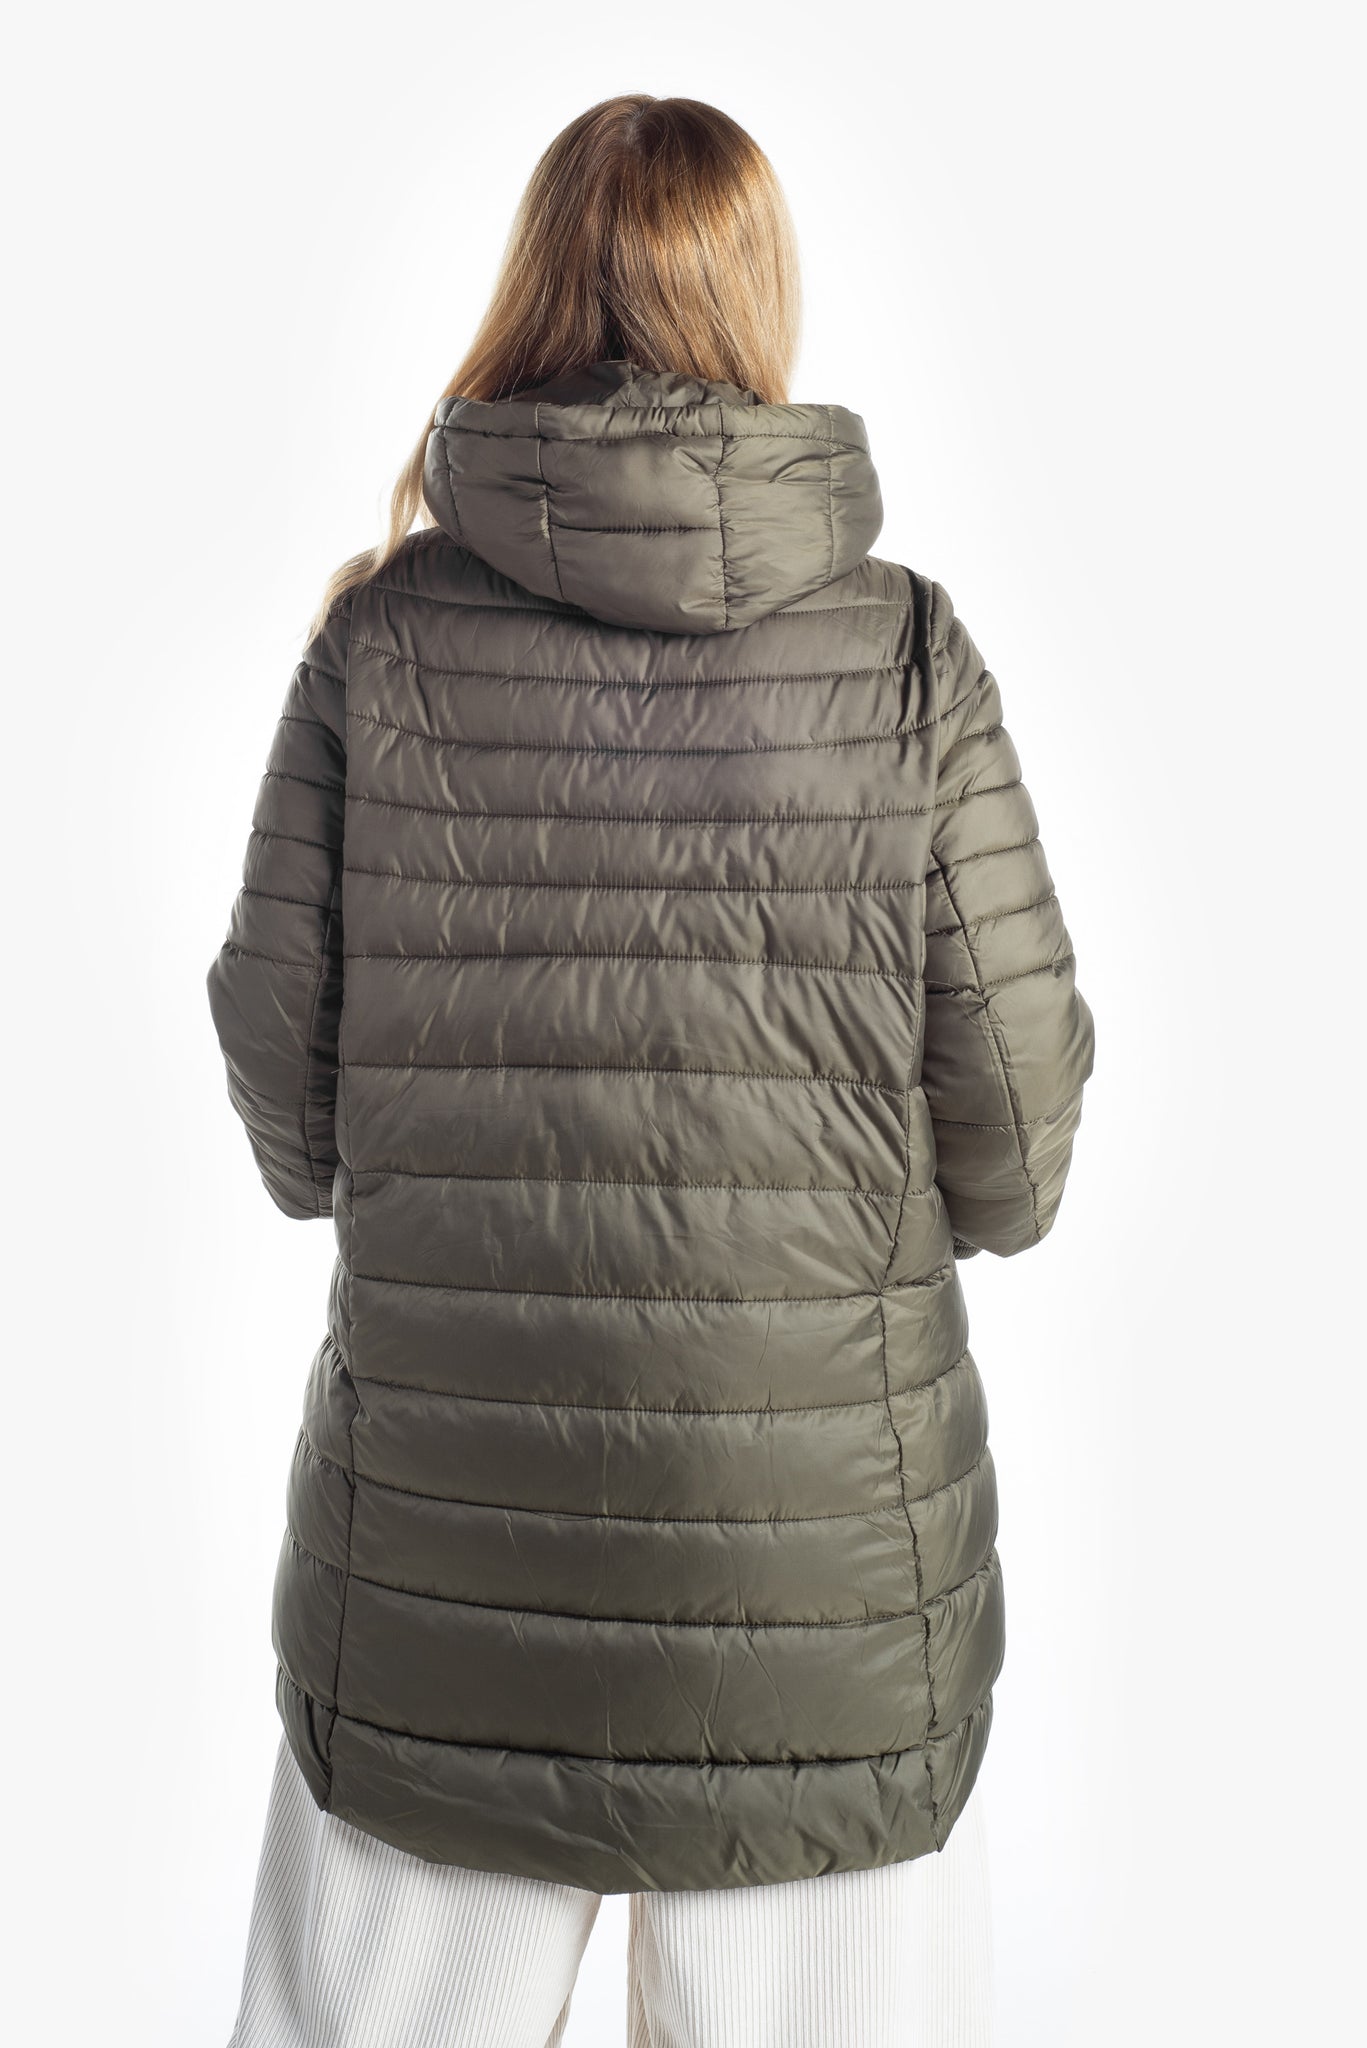 Down jacket with hood.